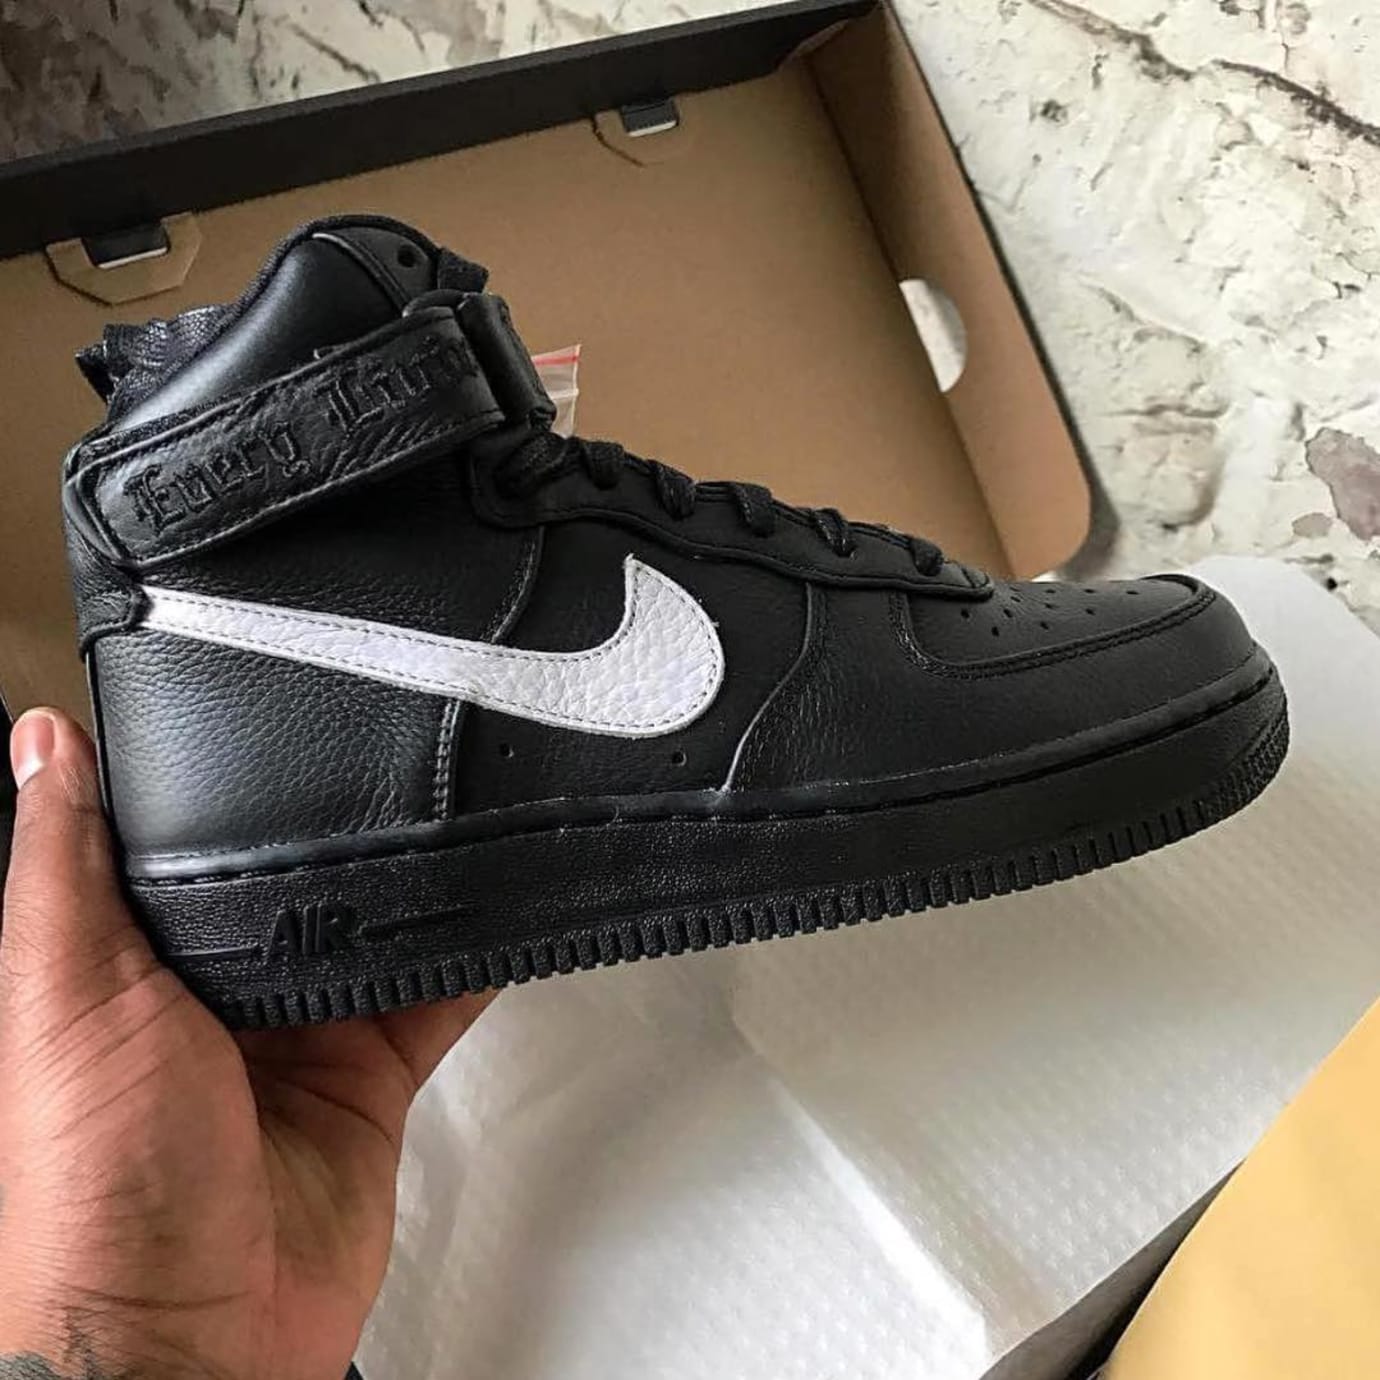 black and white air force 1 high